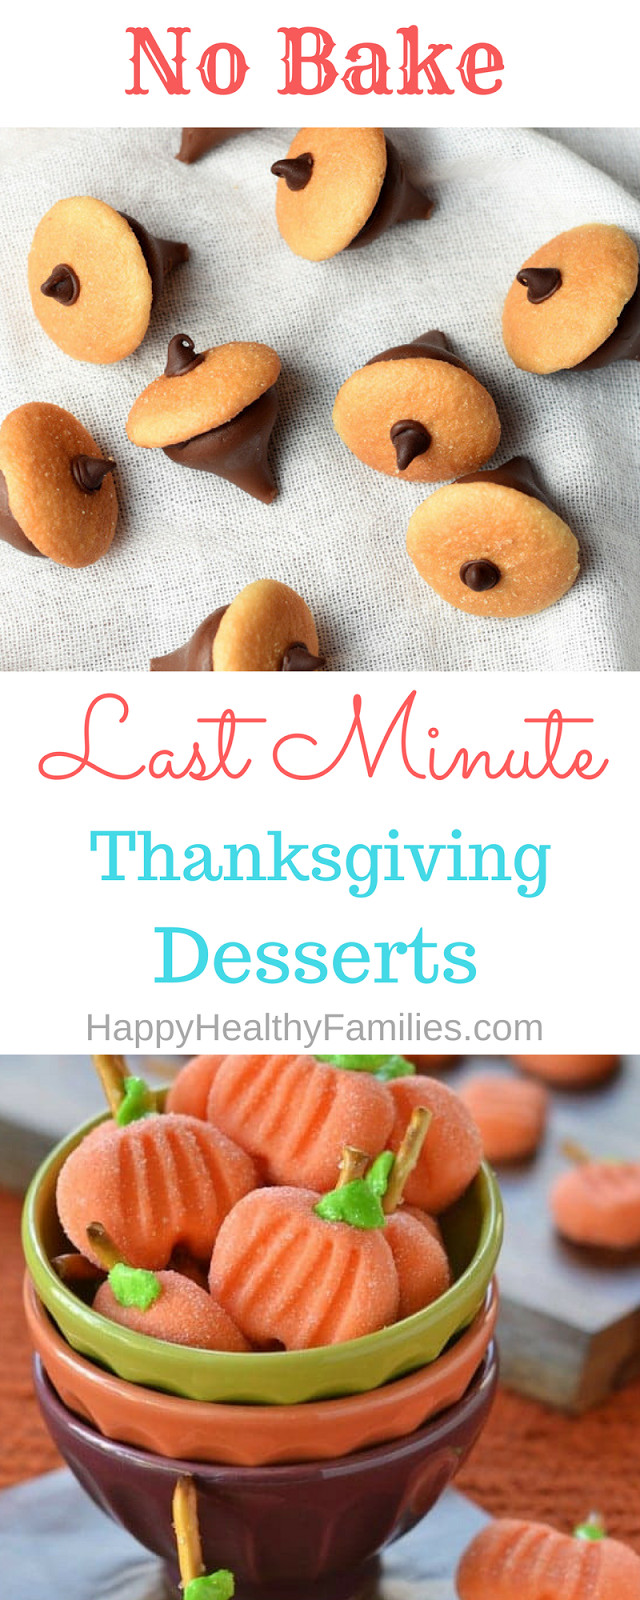 Kid Friendly Thanksgiving Desserts
 Happy Healthy Families 5 Last Minute Thanksgiving